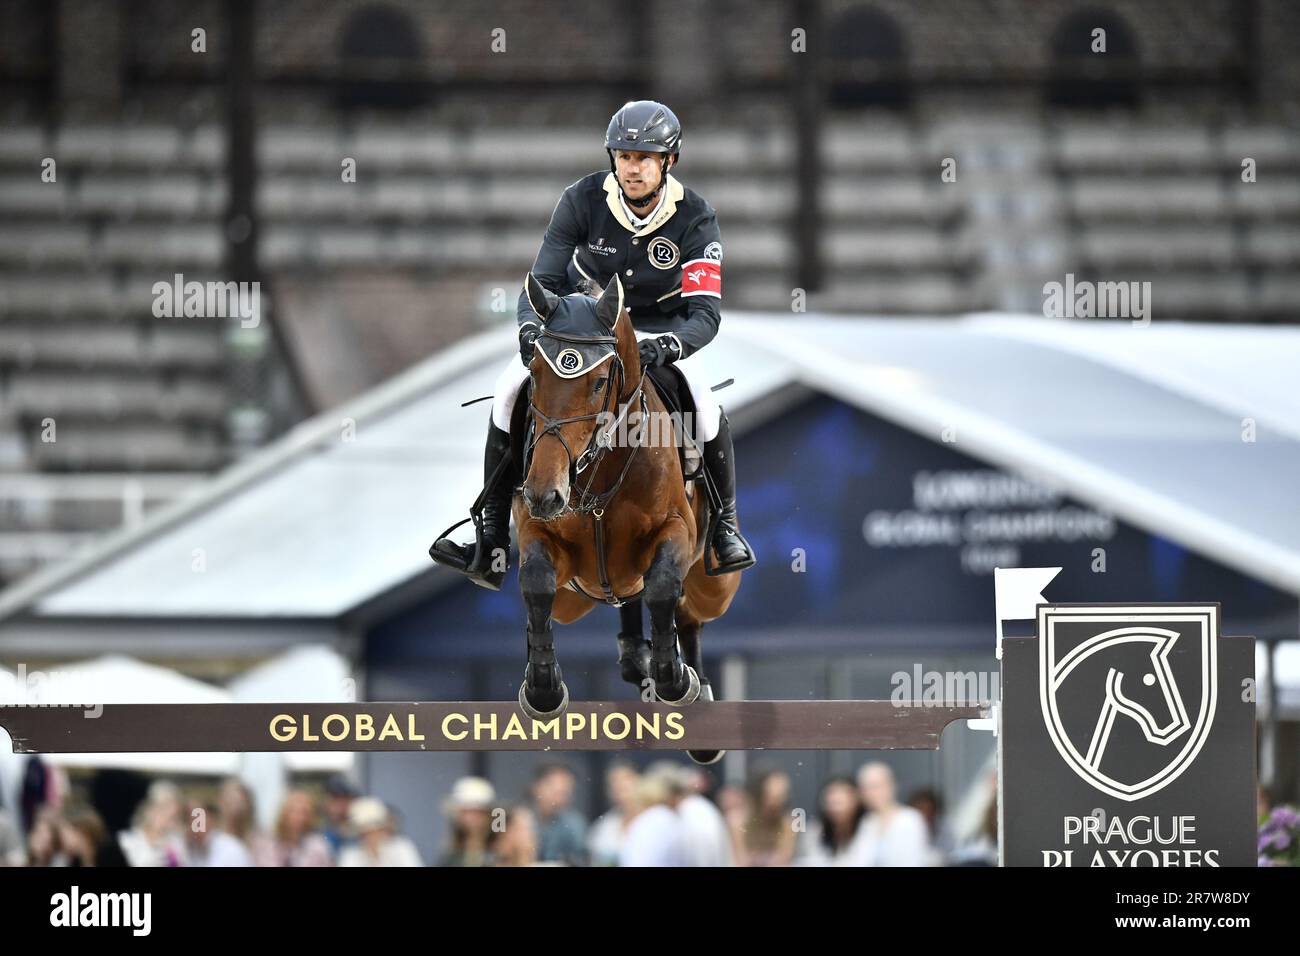 Stockholm, Sweden. 17th June, 2023. STOCKHOLM 20230617 Christian Kukuk,  Germany, on the horse Just Be Gentle during the team event jumping against  the clock in the Longines Global Champions Tour in Stockholm